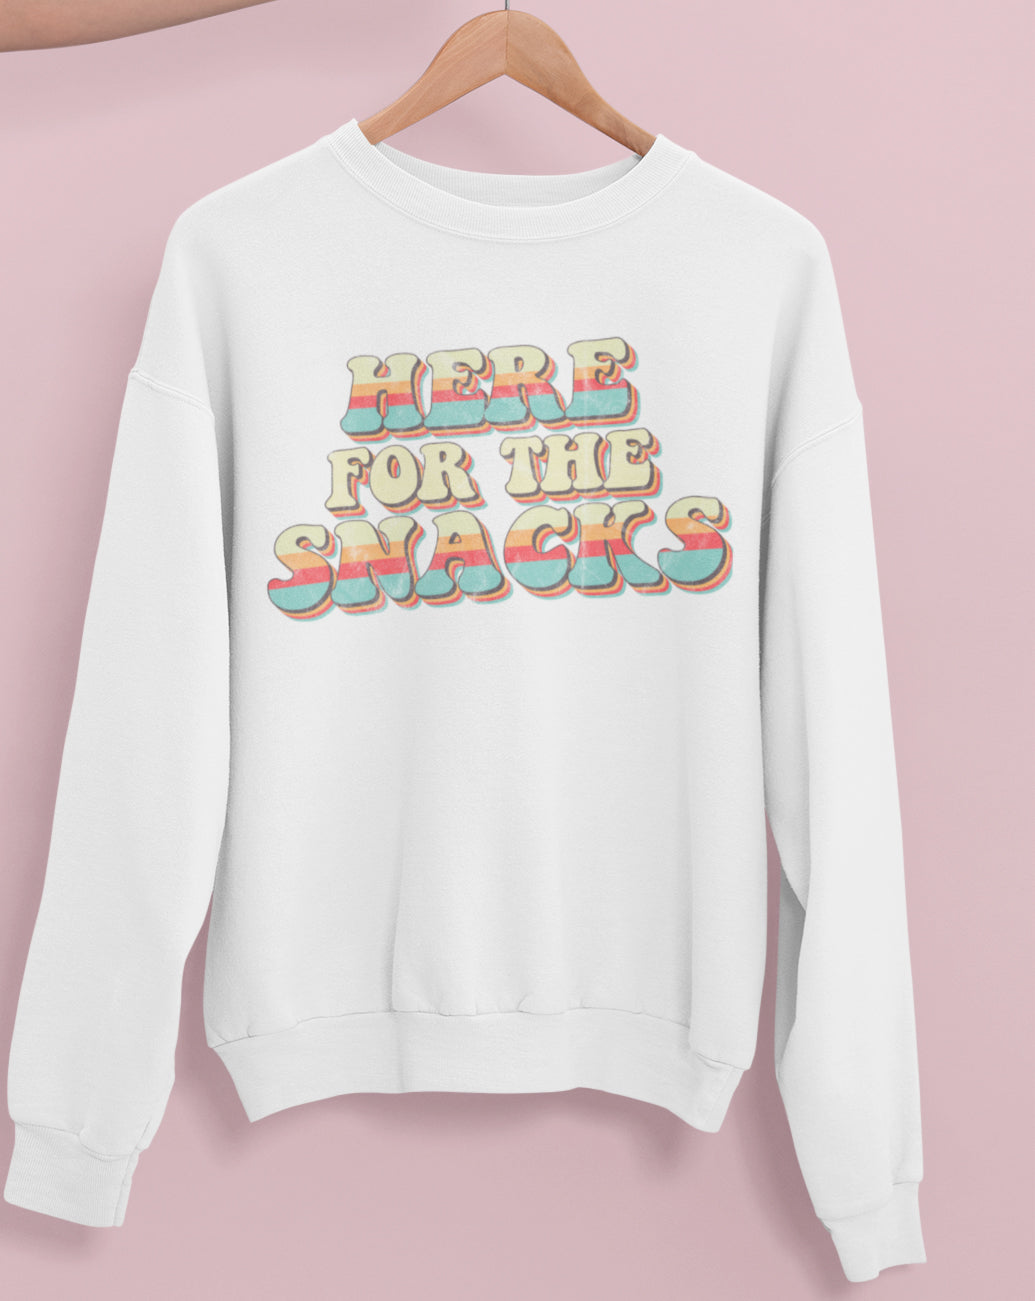 White sweatshirt with colorful retro graphic that says here for the snacks - HighCiti